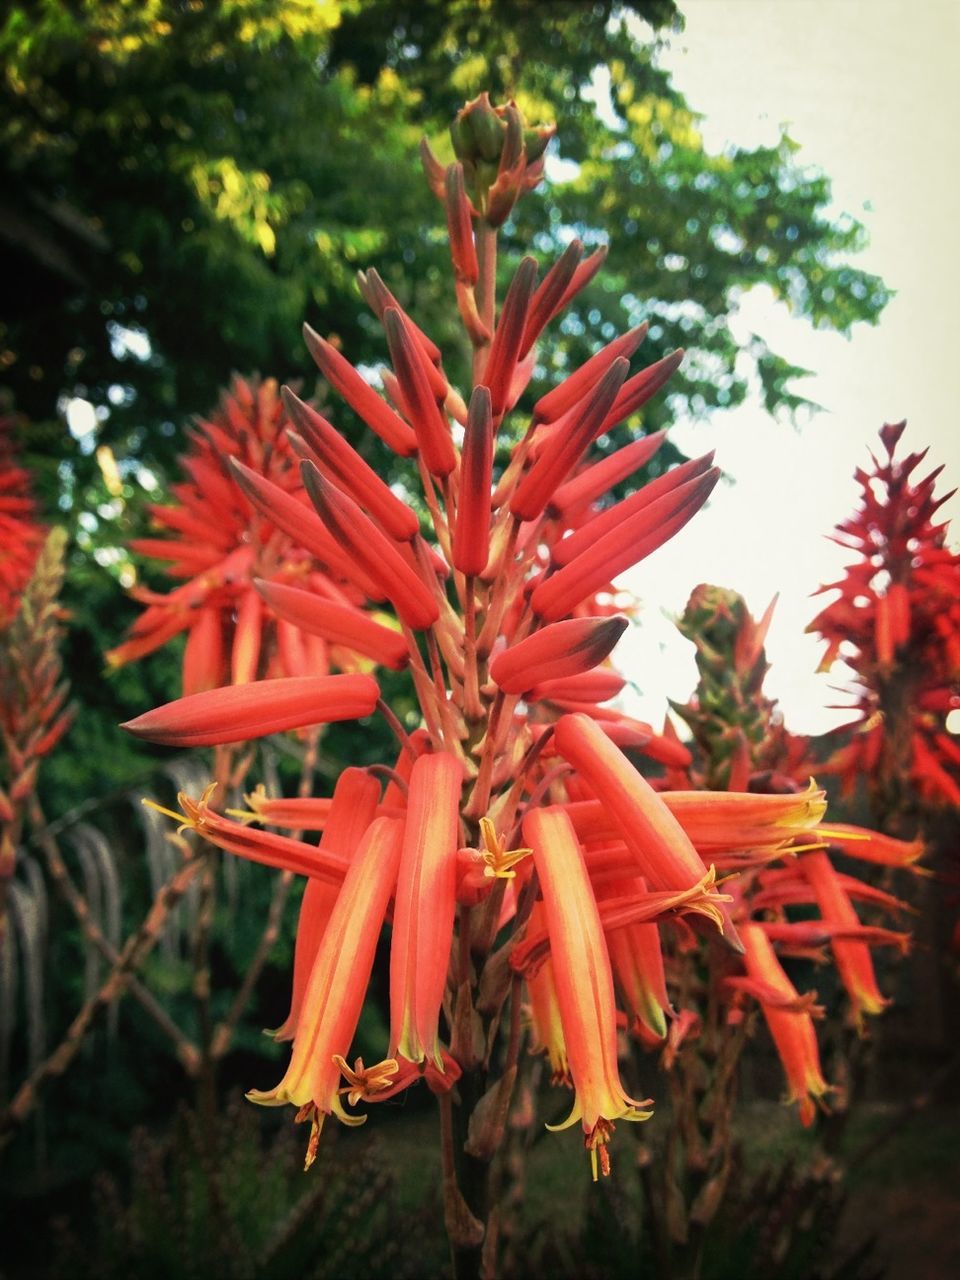 CLOSE-UP OF RED FLOWERS BLOOMING